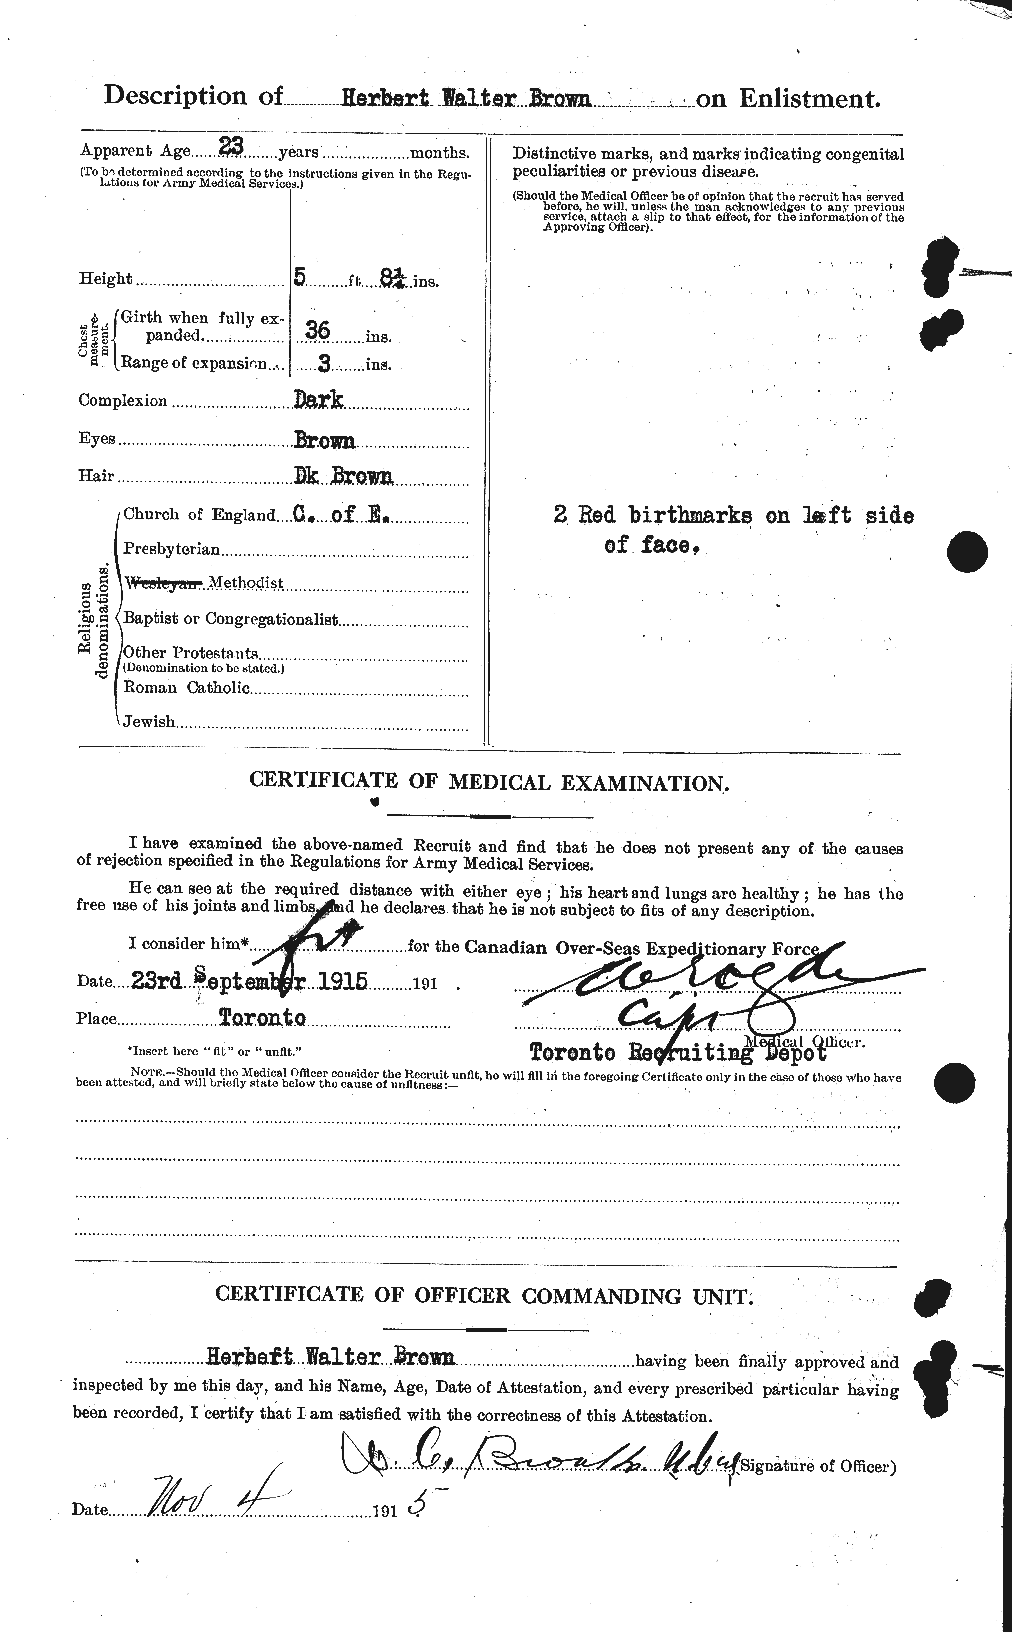 Personnel Records of the First World War - CEF 265590b